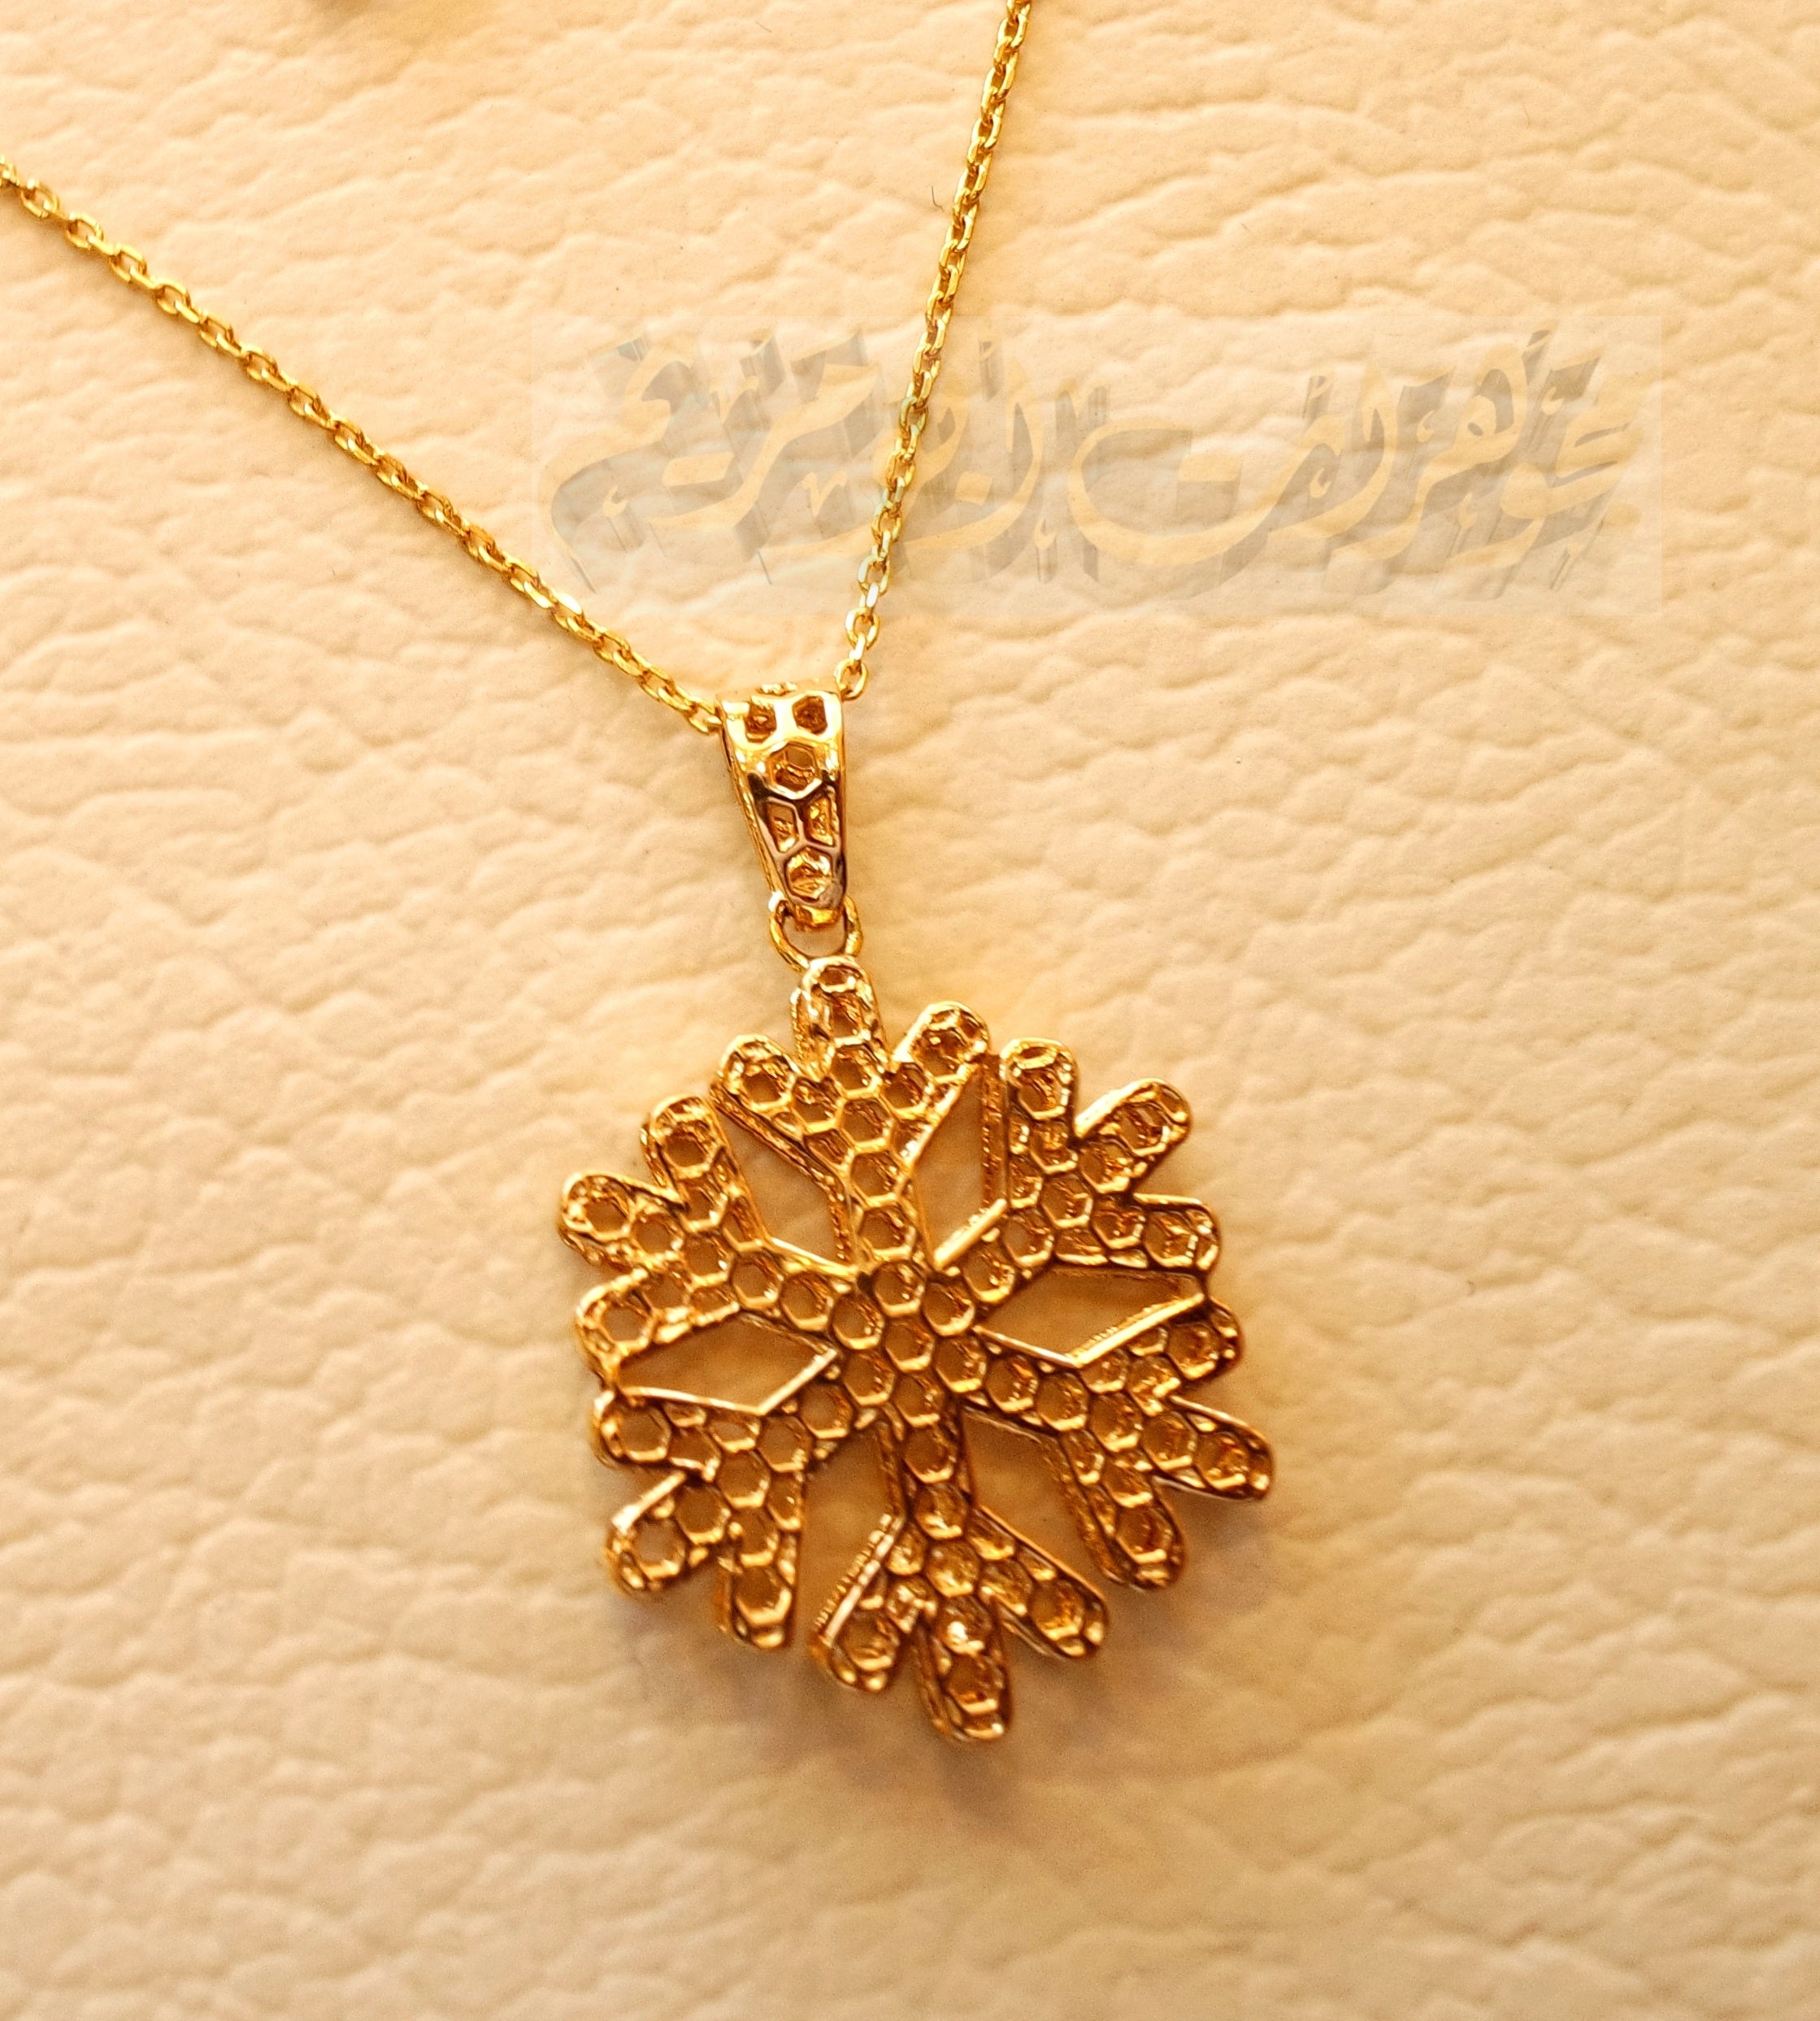 Honeycomb snowflake 3d 18K yellow gold necklace pendant and chain gift fine jewelry full insured shipping